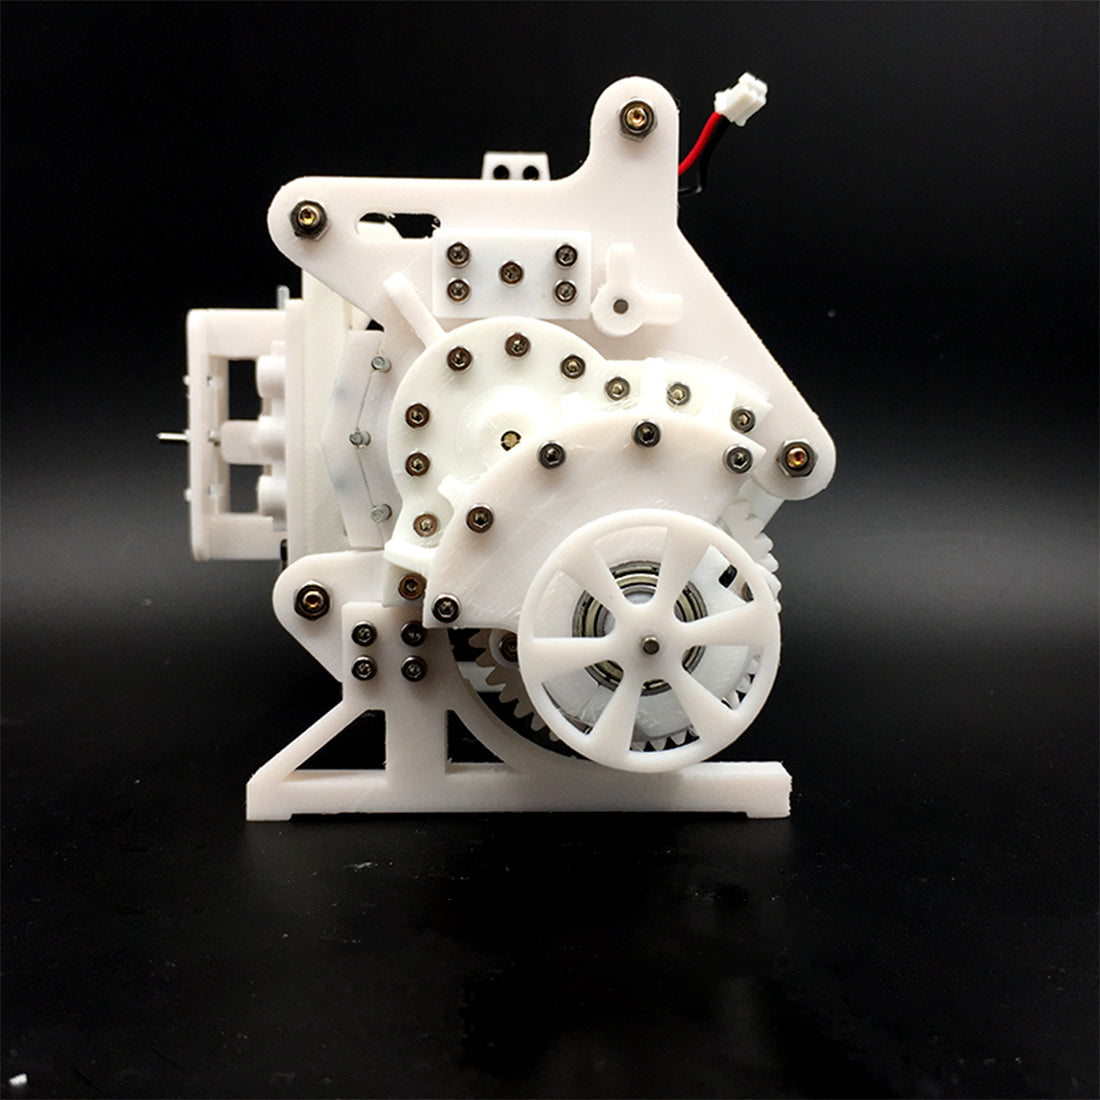 Nice Gears on Automatic Transmission Model made with 3D Printer